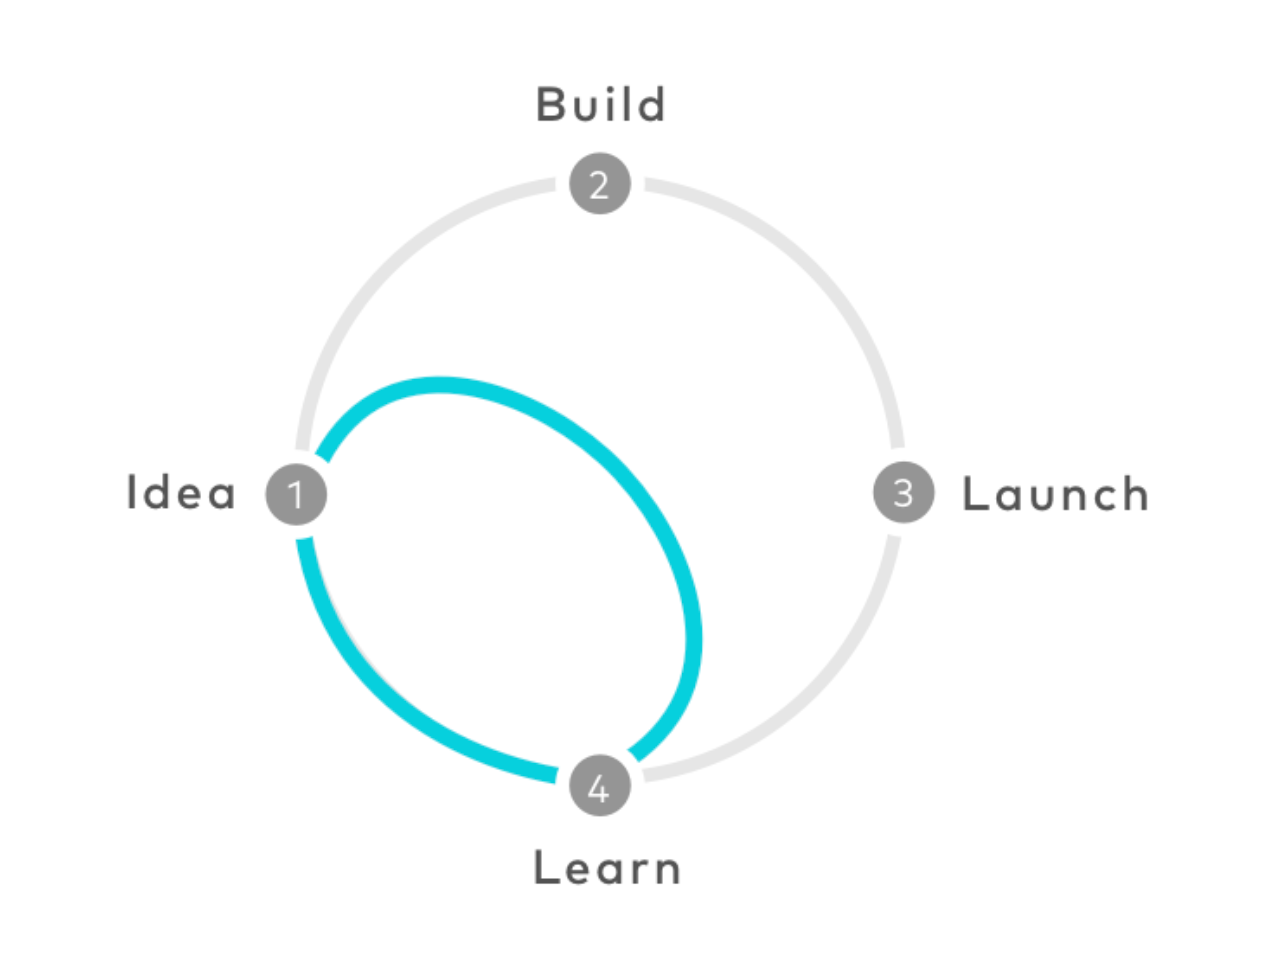 Design sprint - Skip the build and launch phases